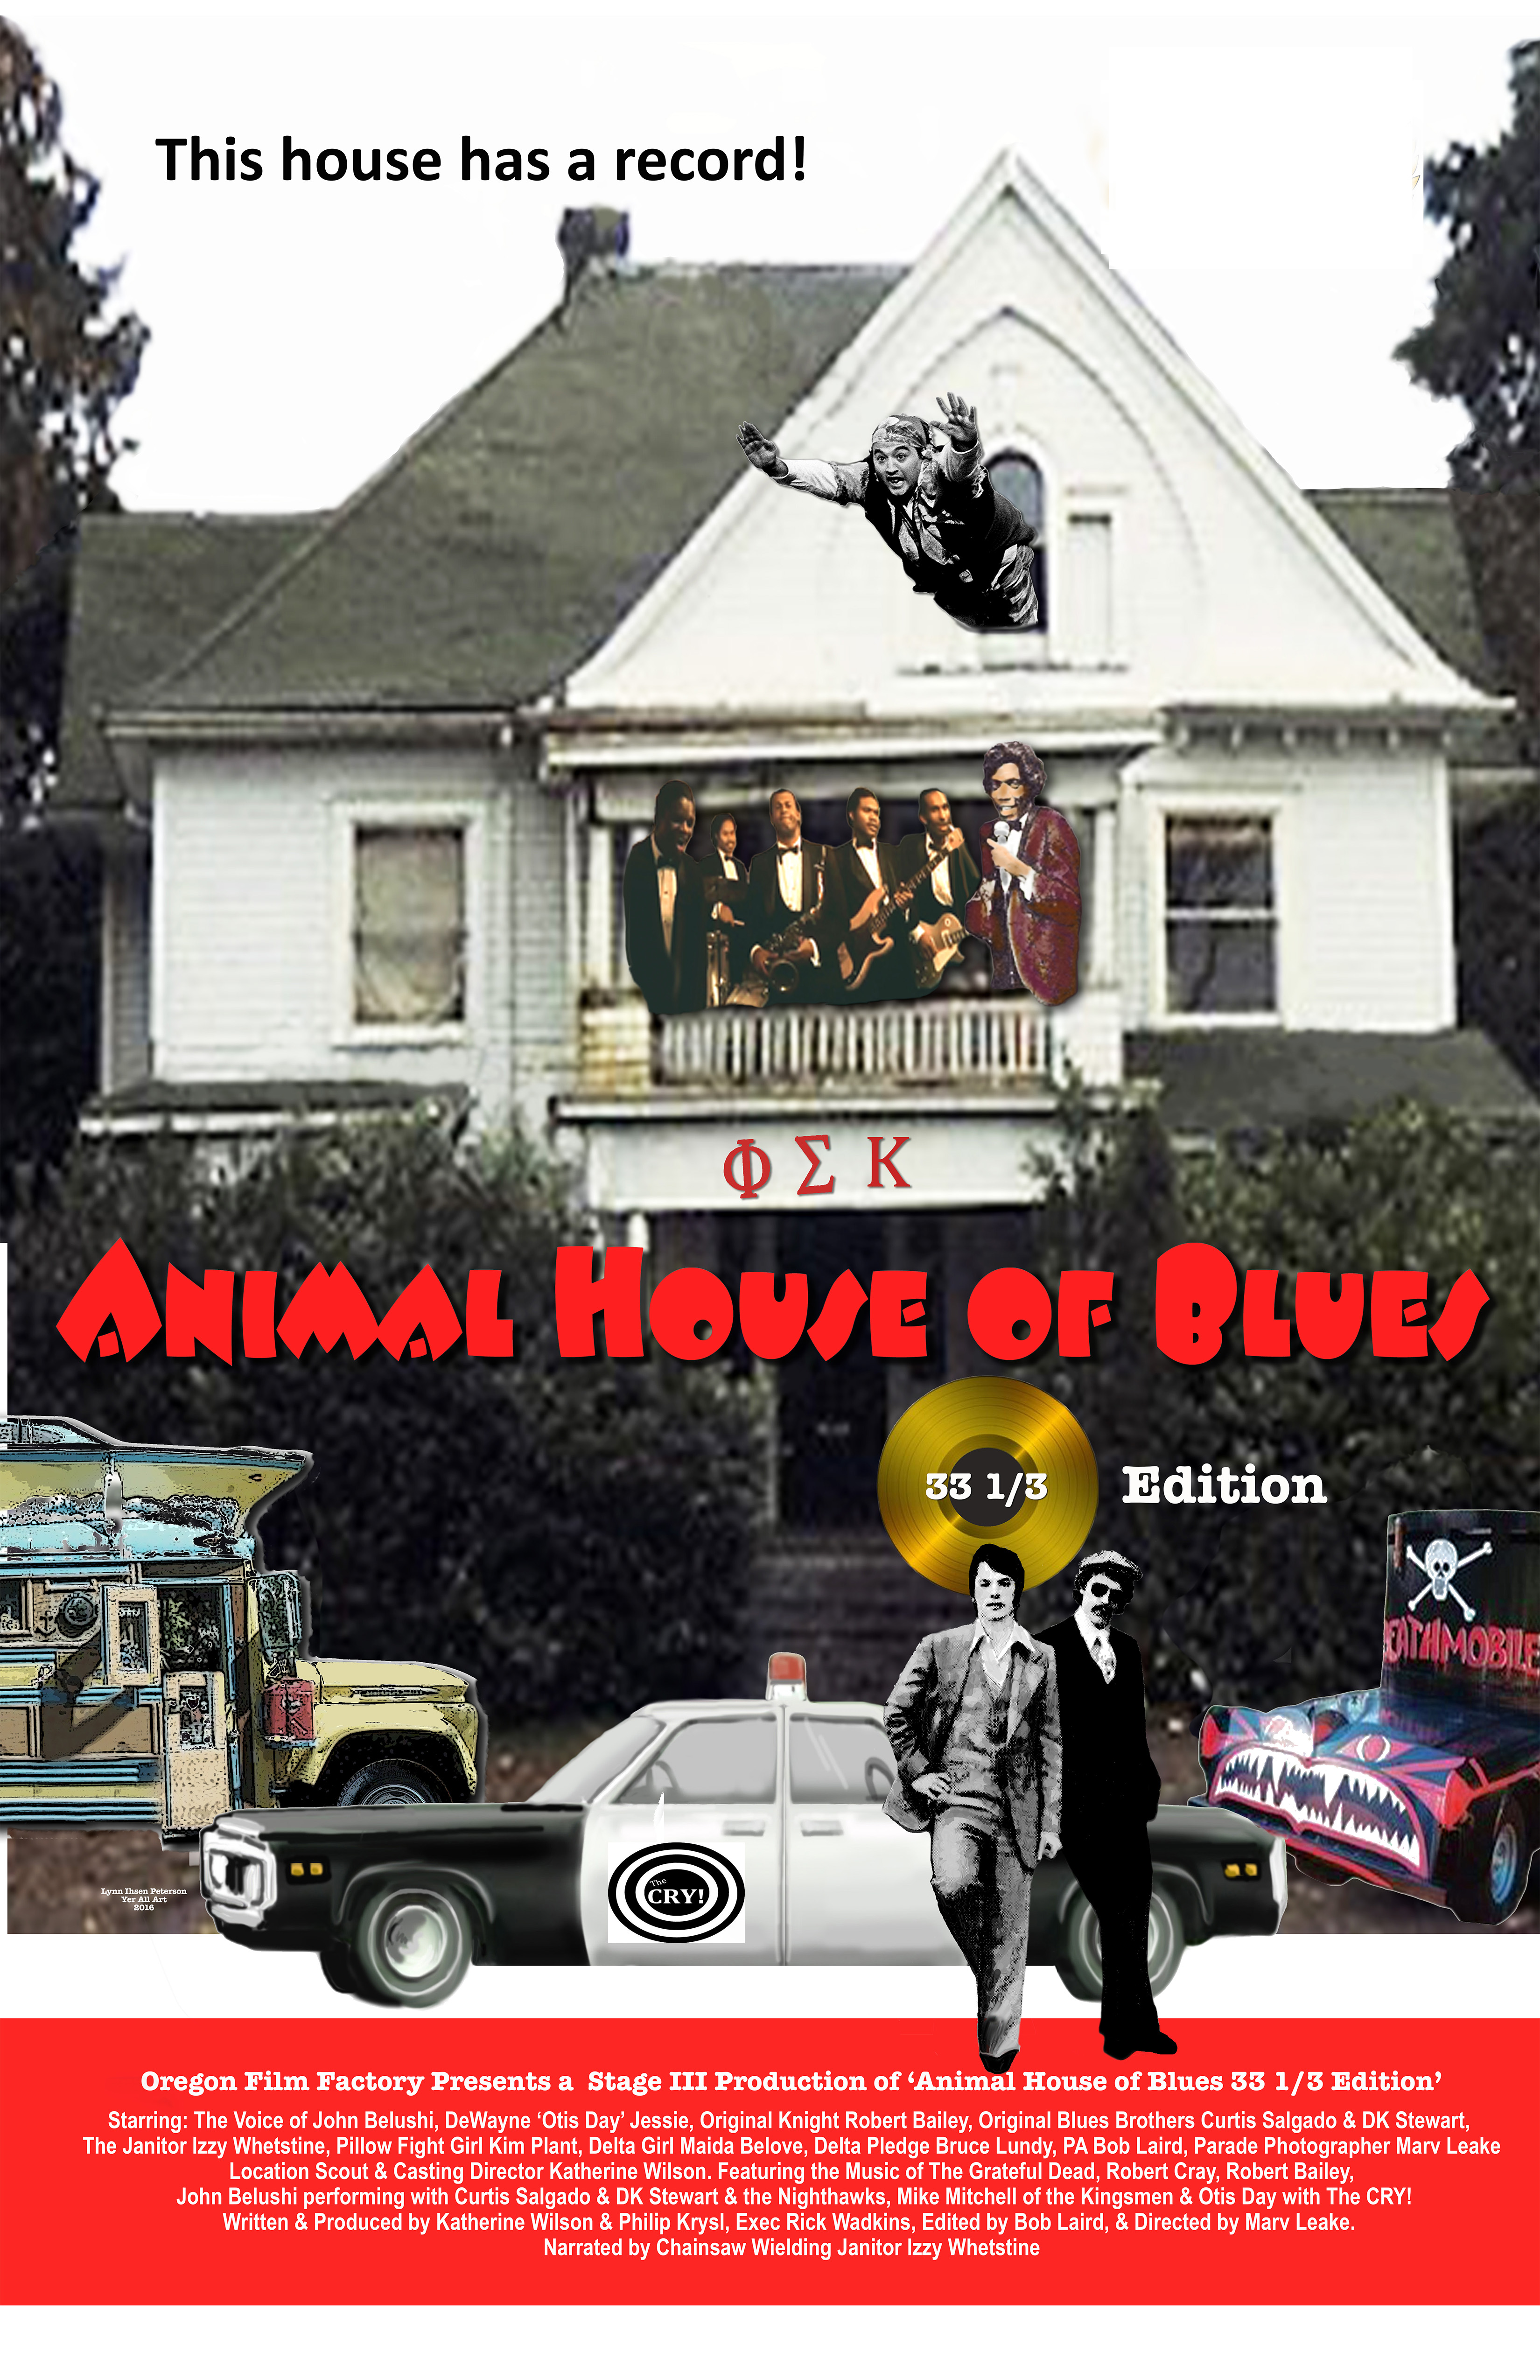 Animal House of Blues: 33.3 Special Edition